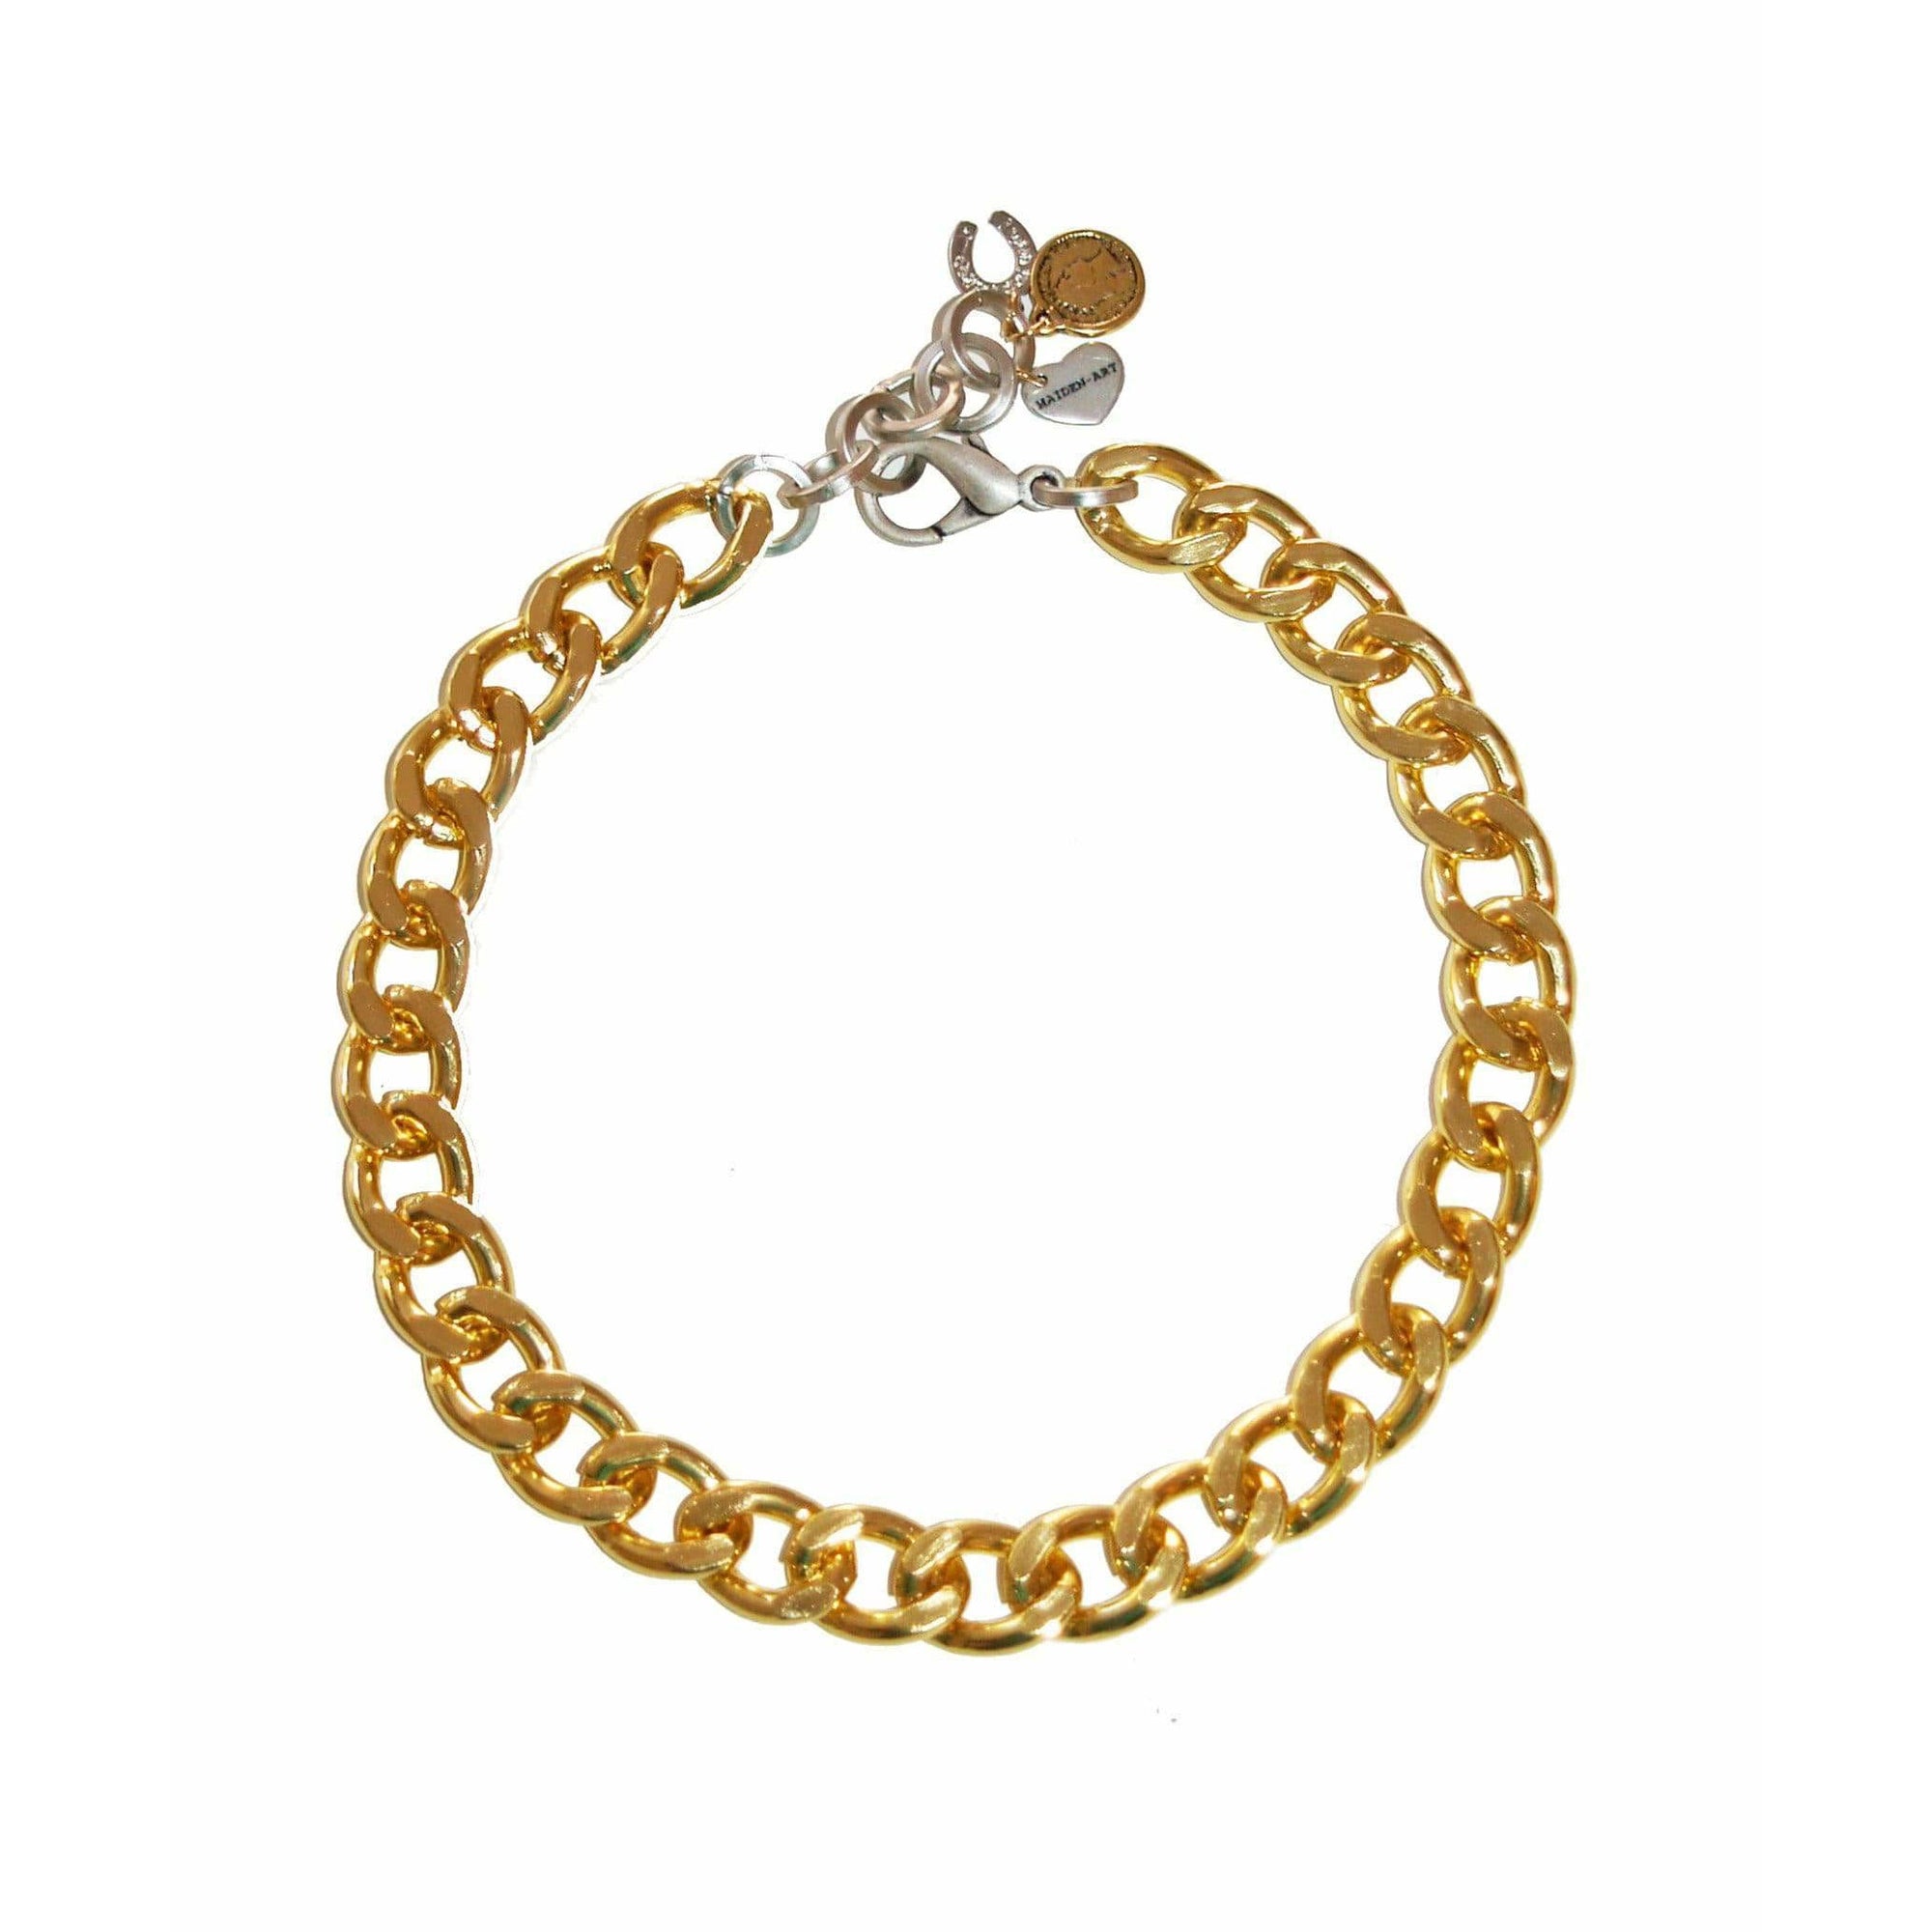 Gold Chain Choker With Charms - Miraposa